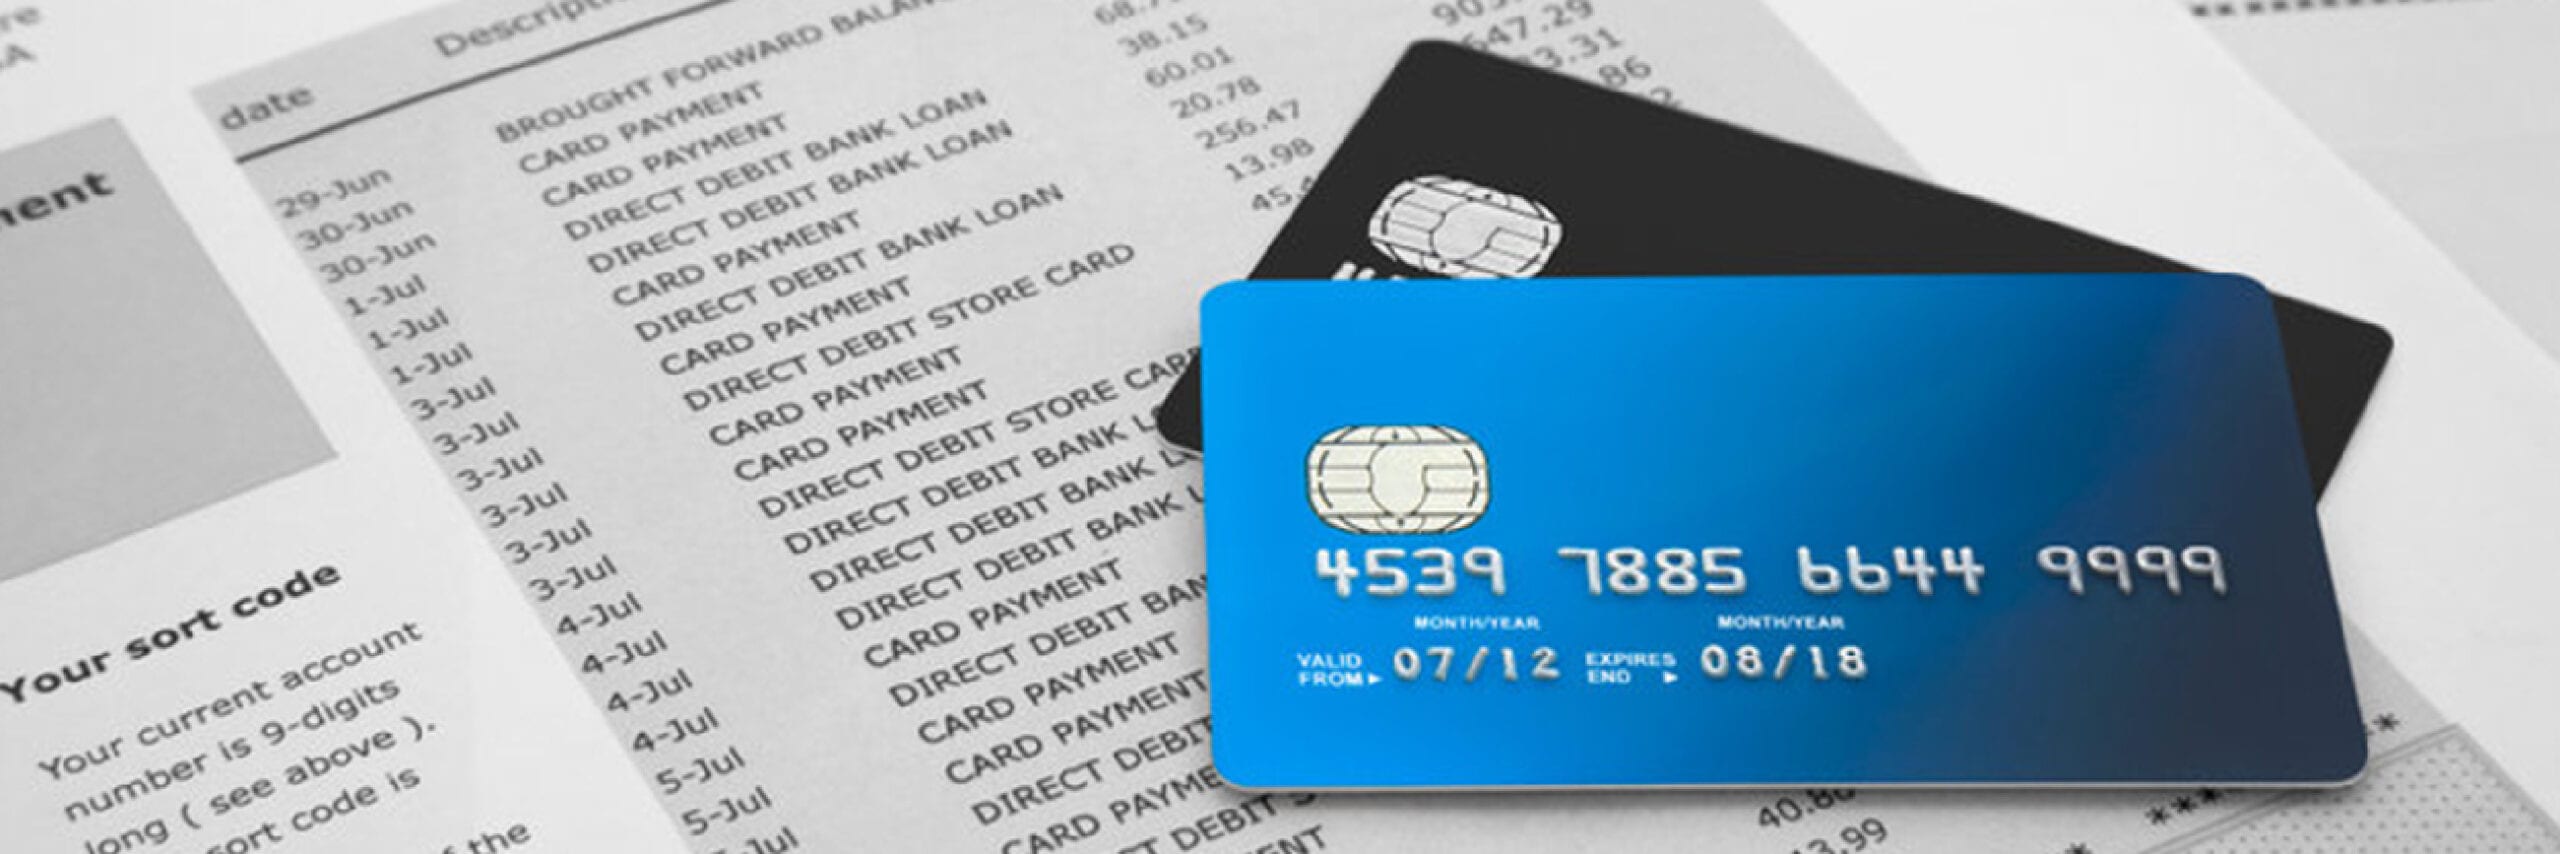 Debt and credit cards